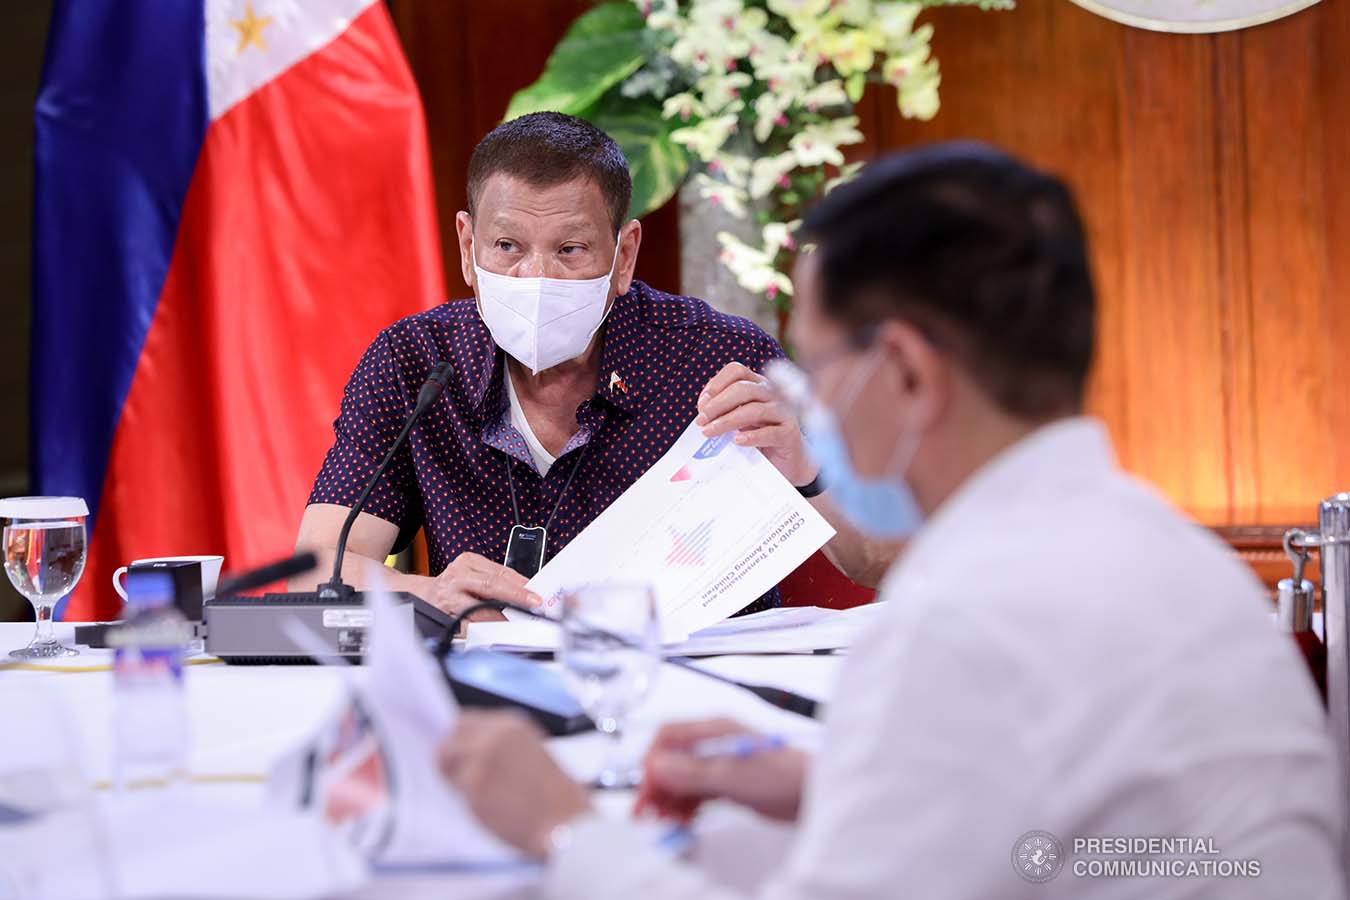 President Rodrigo Roa Duterte talks to the people after holding a meeting with the Inter-Agency Task Force on the Emerging Infectious Diseases (IATF-EID) core members at the Malago Clubhouse in Malacañang on July 21, 2020. ROBINSON NIÑAL JR./PRESIDENTIAL PHOTO